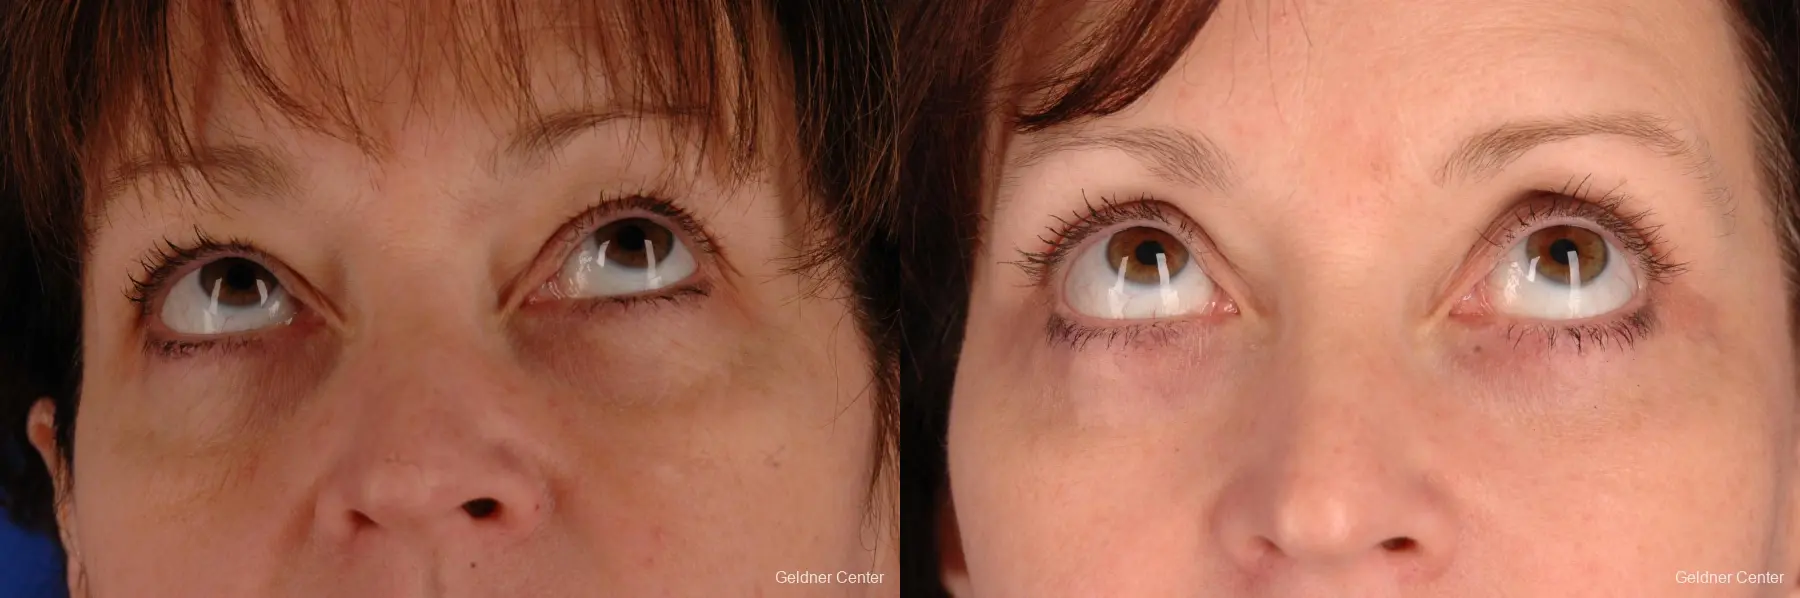 Chicago Eyelid Lift 2323 - Before and After 3